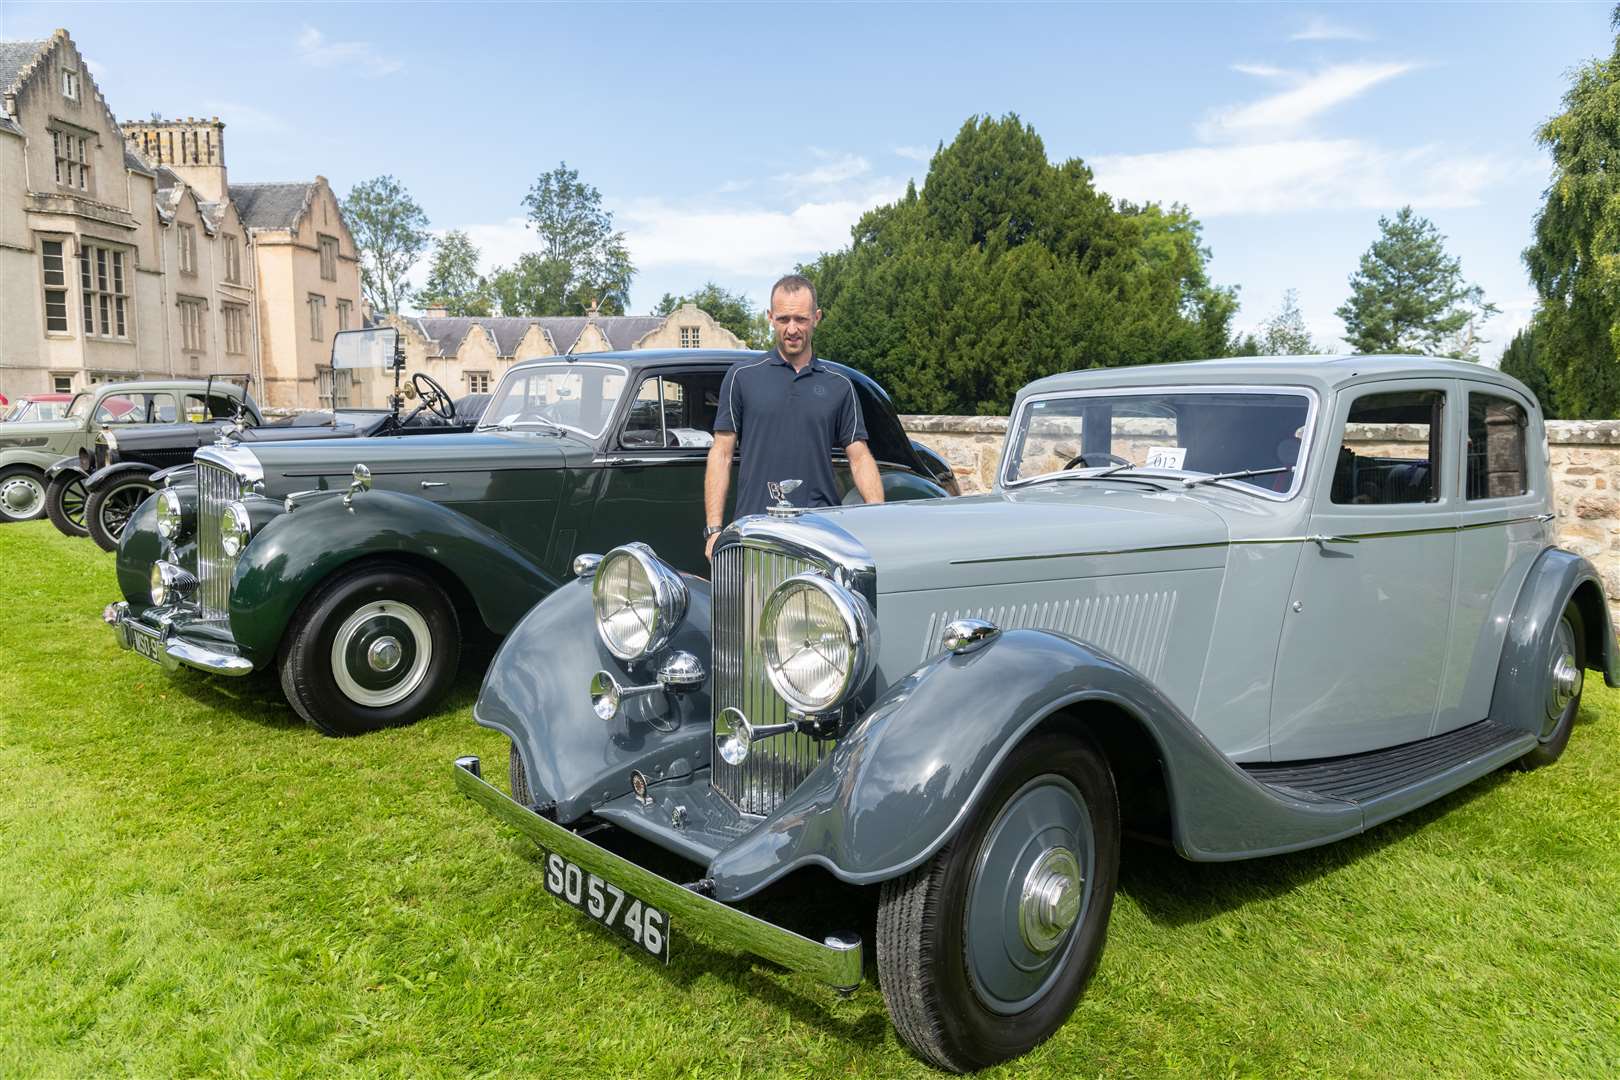 Gavin MacDonald with his Bentley which was originally owned by Lt. Col. J.E.Tennant of Innes, Elgin.